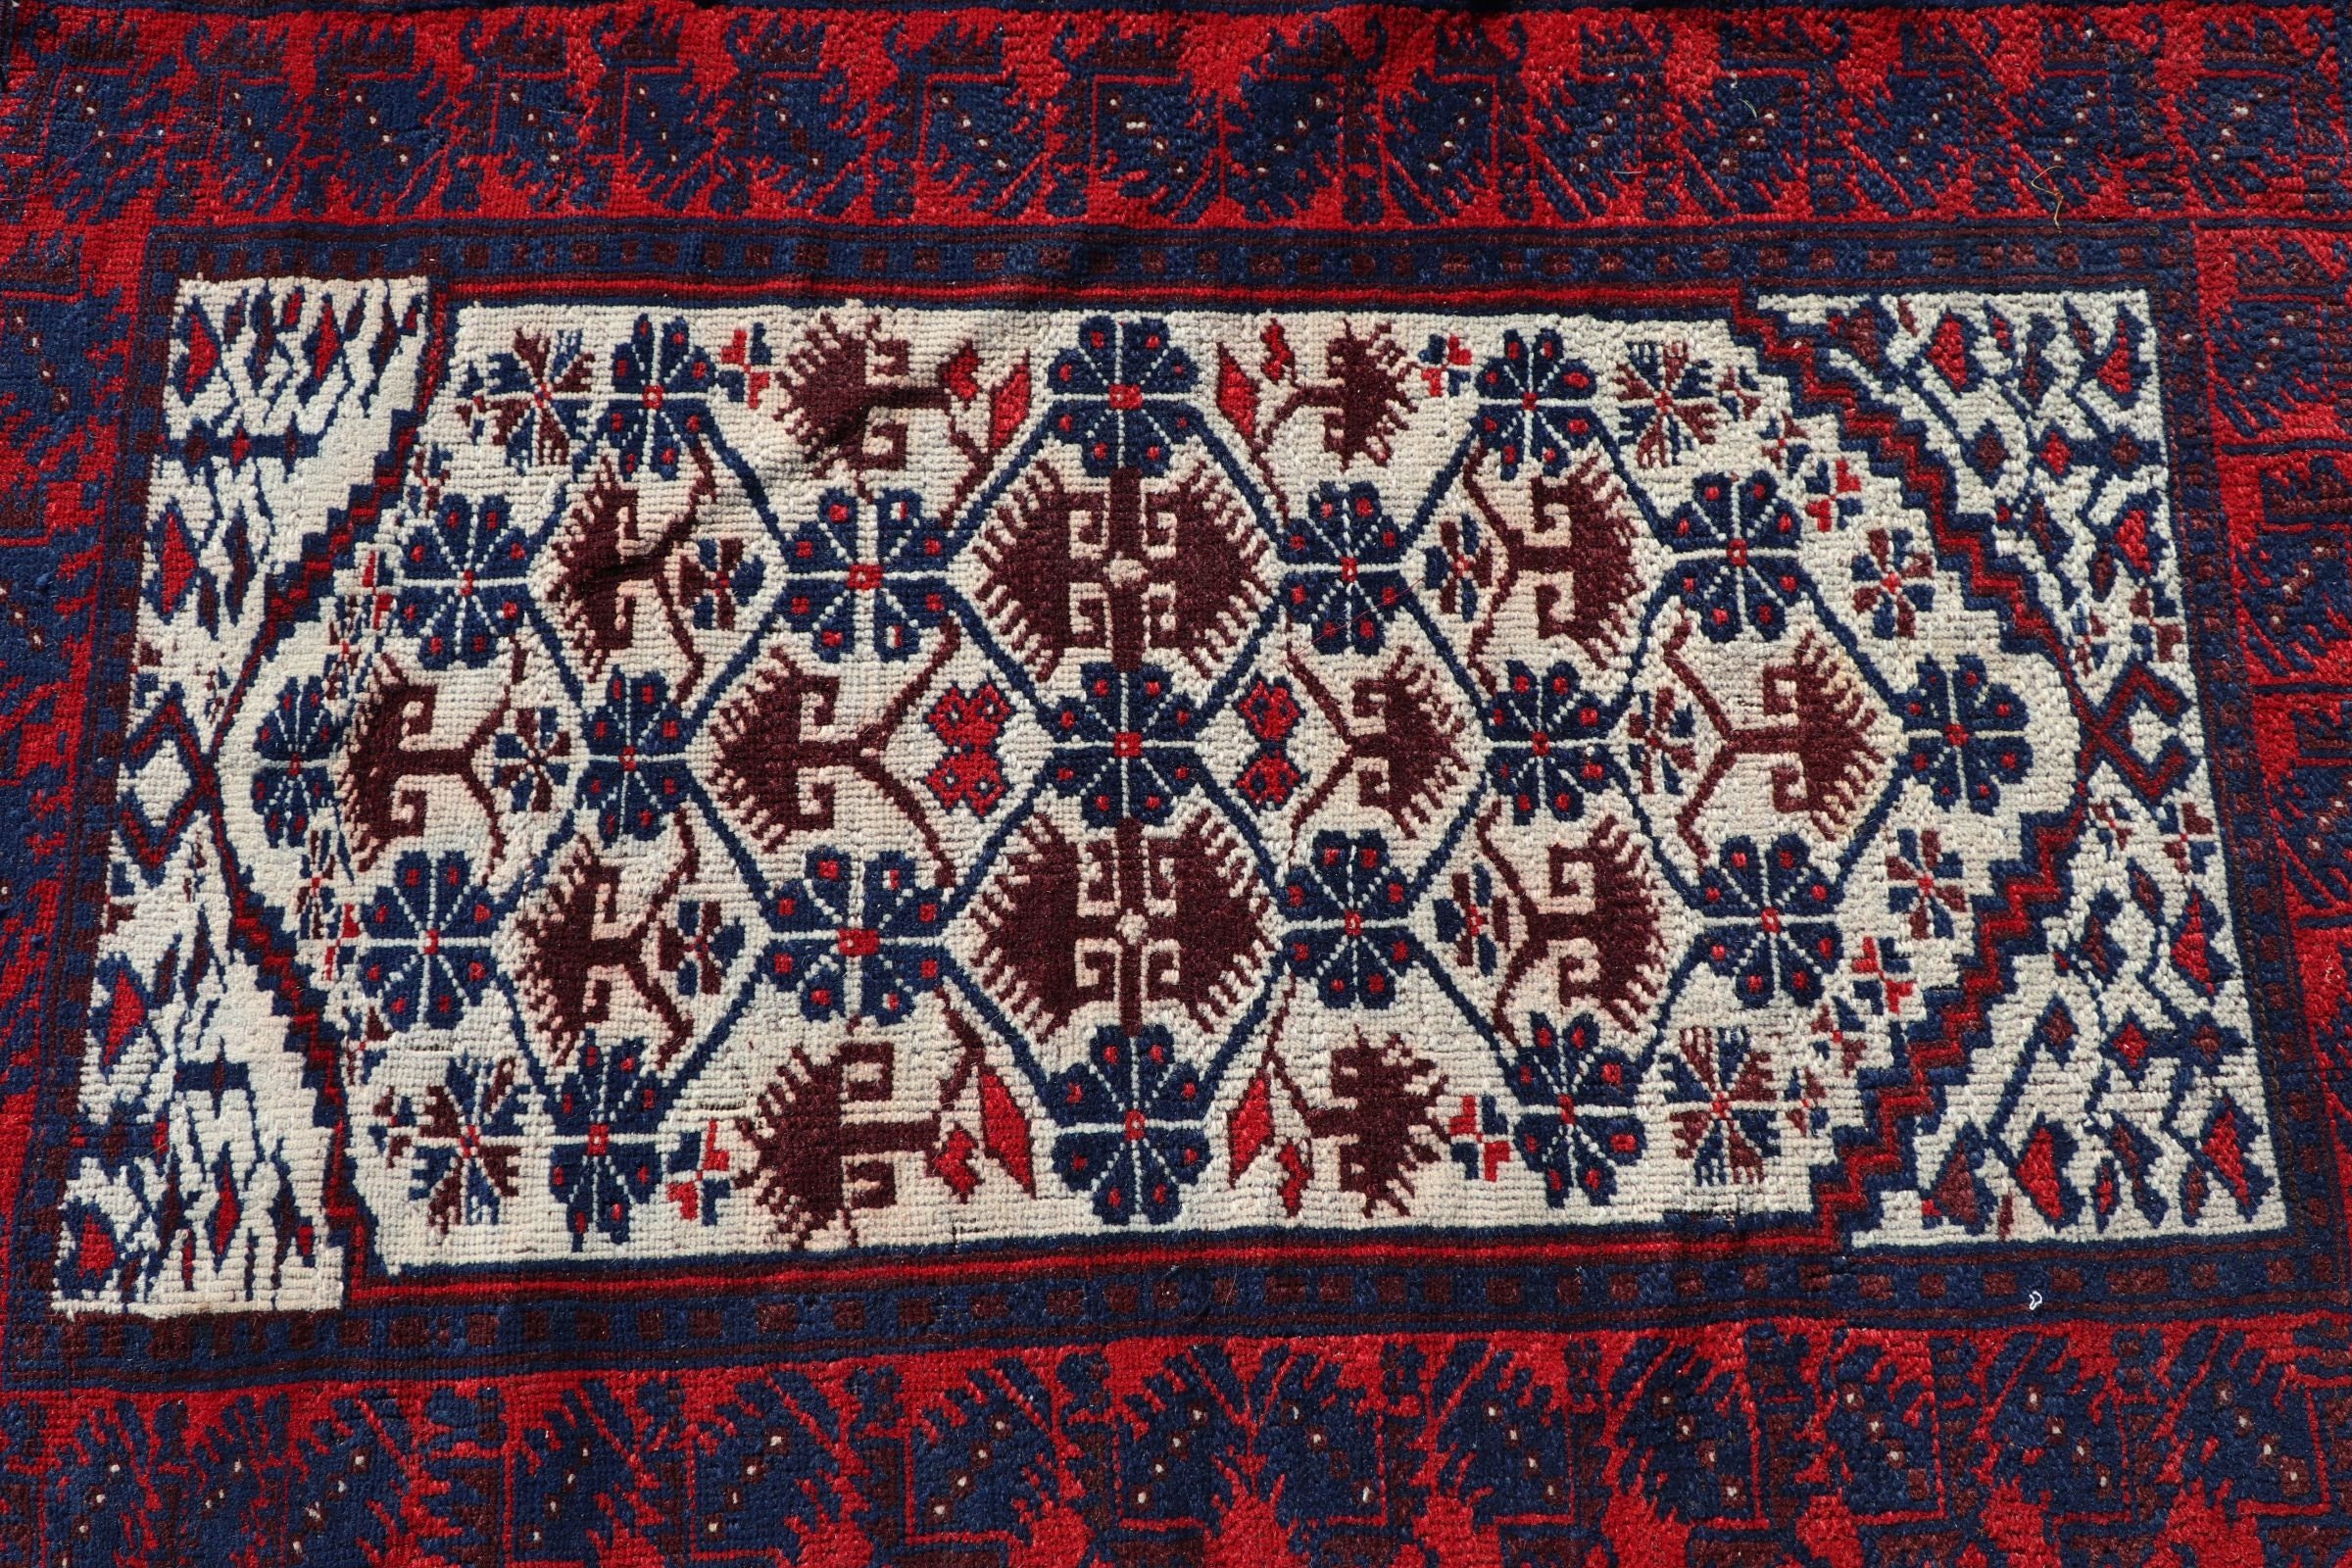 Turkish Rug, Rugs for Entry, Vintage Rug, Moroccan Rug, Kitchen Rug, Entry Rug, Oriental Rug, Red  2.5x3.6 ft Small Rug